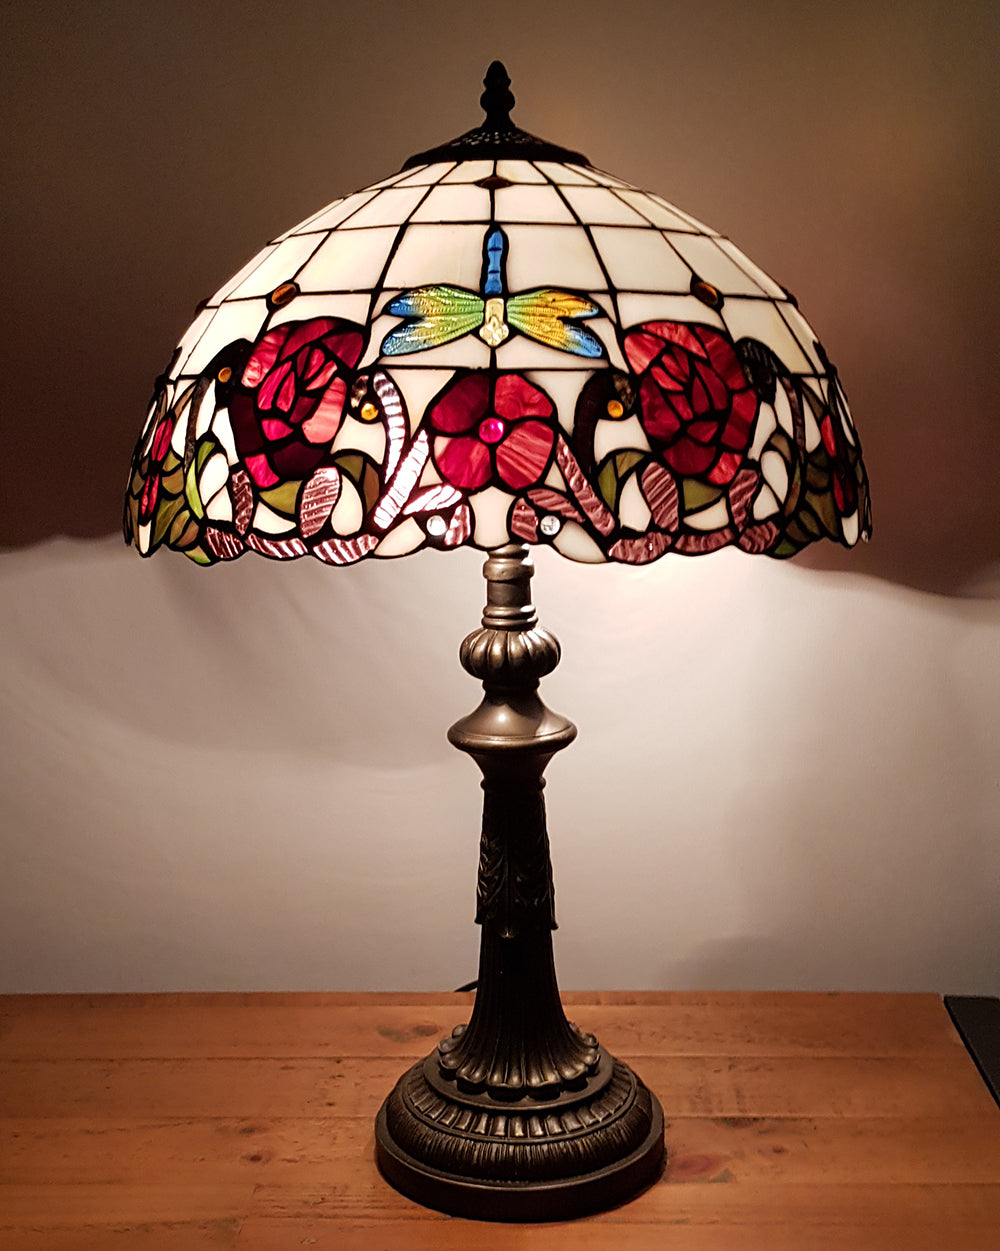 KLiving 12" Wycombe Tiffany Table Lamp With Stained Rose Glass Shade